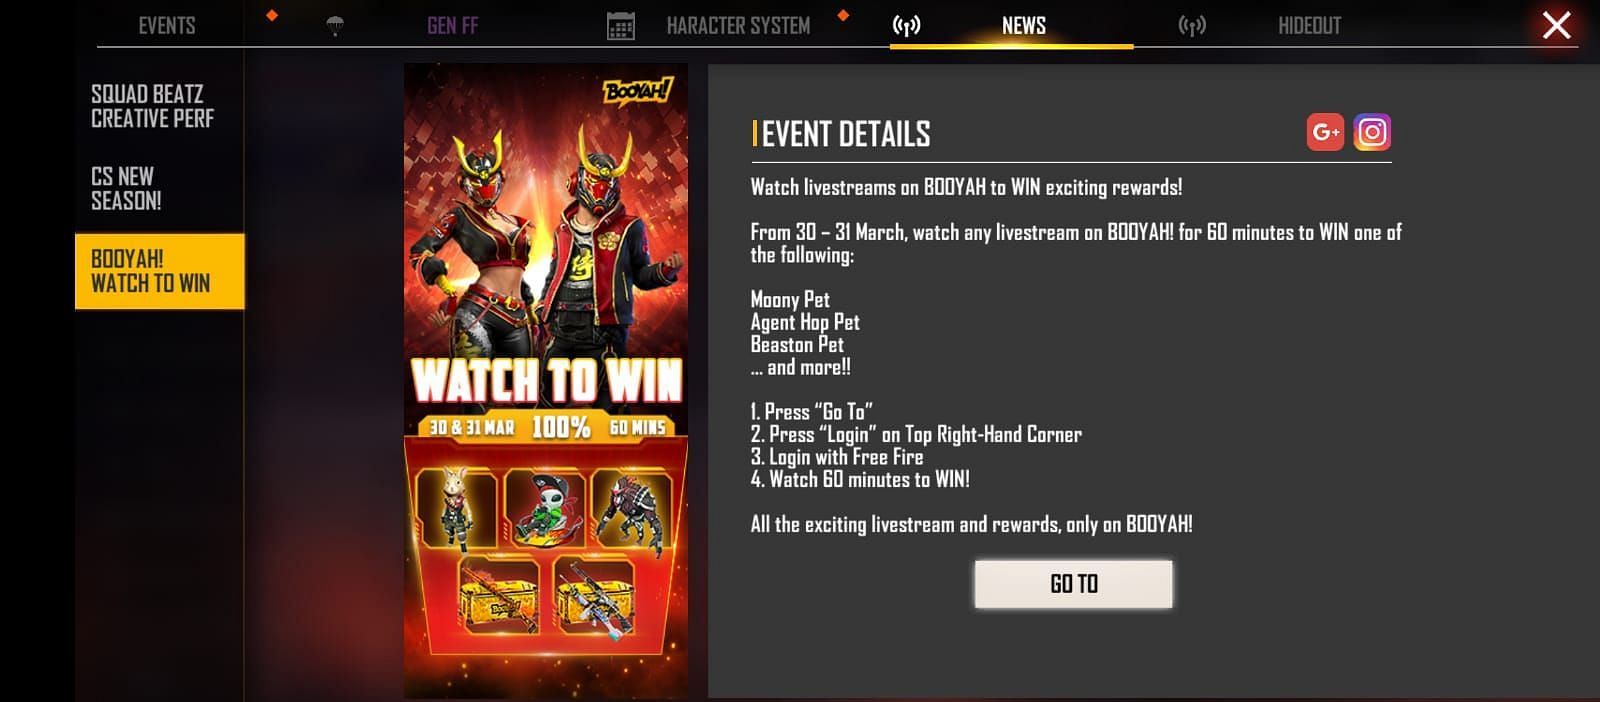 The prizes offered in the latest Watch to Win event (Image via Garena)